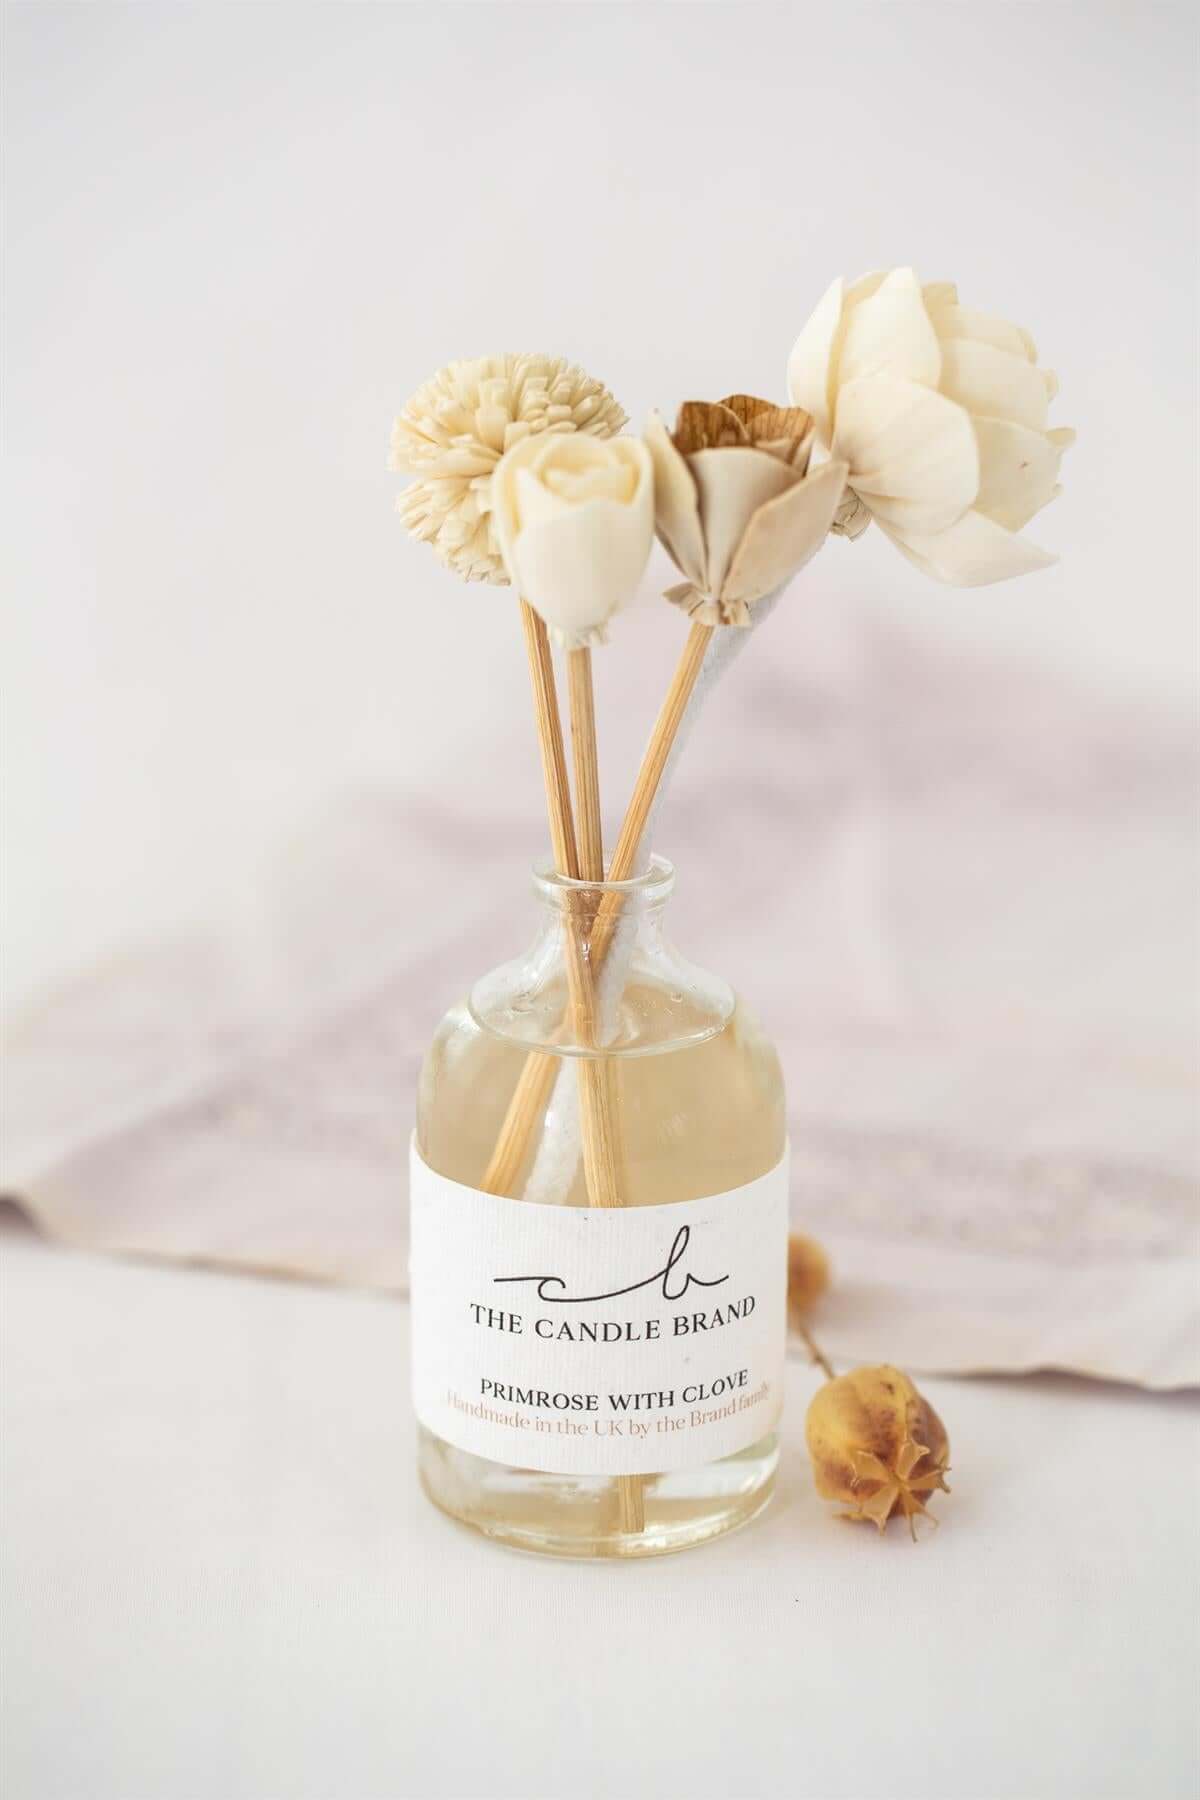 Primrose with Clove Flower Diffuser-The Candle Brand